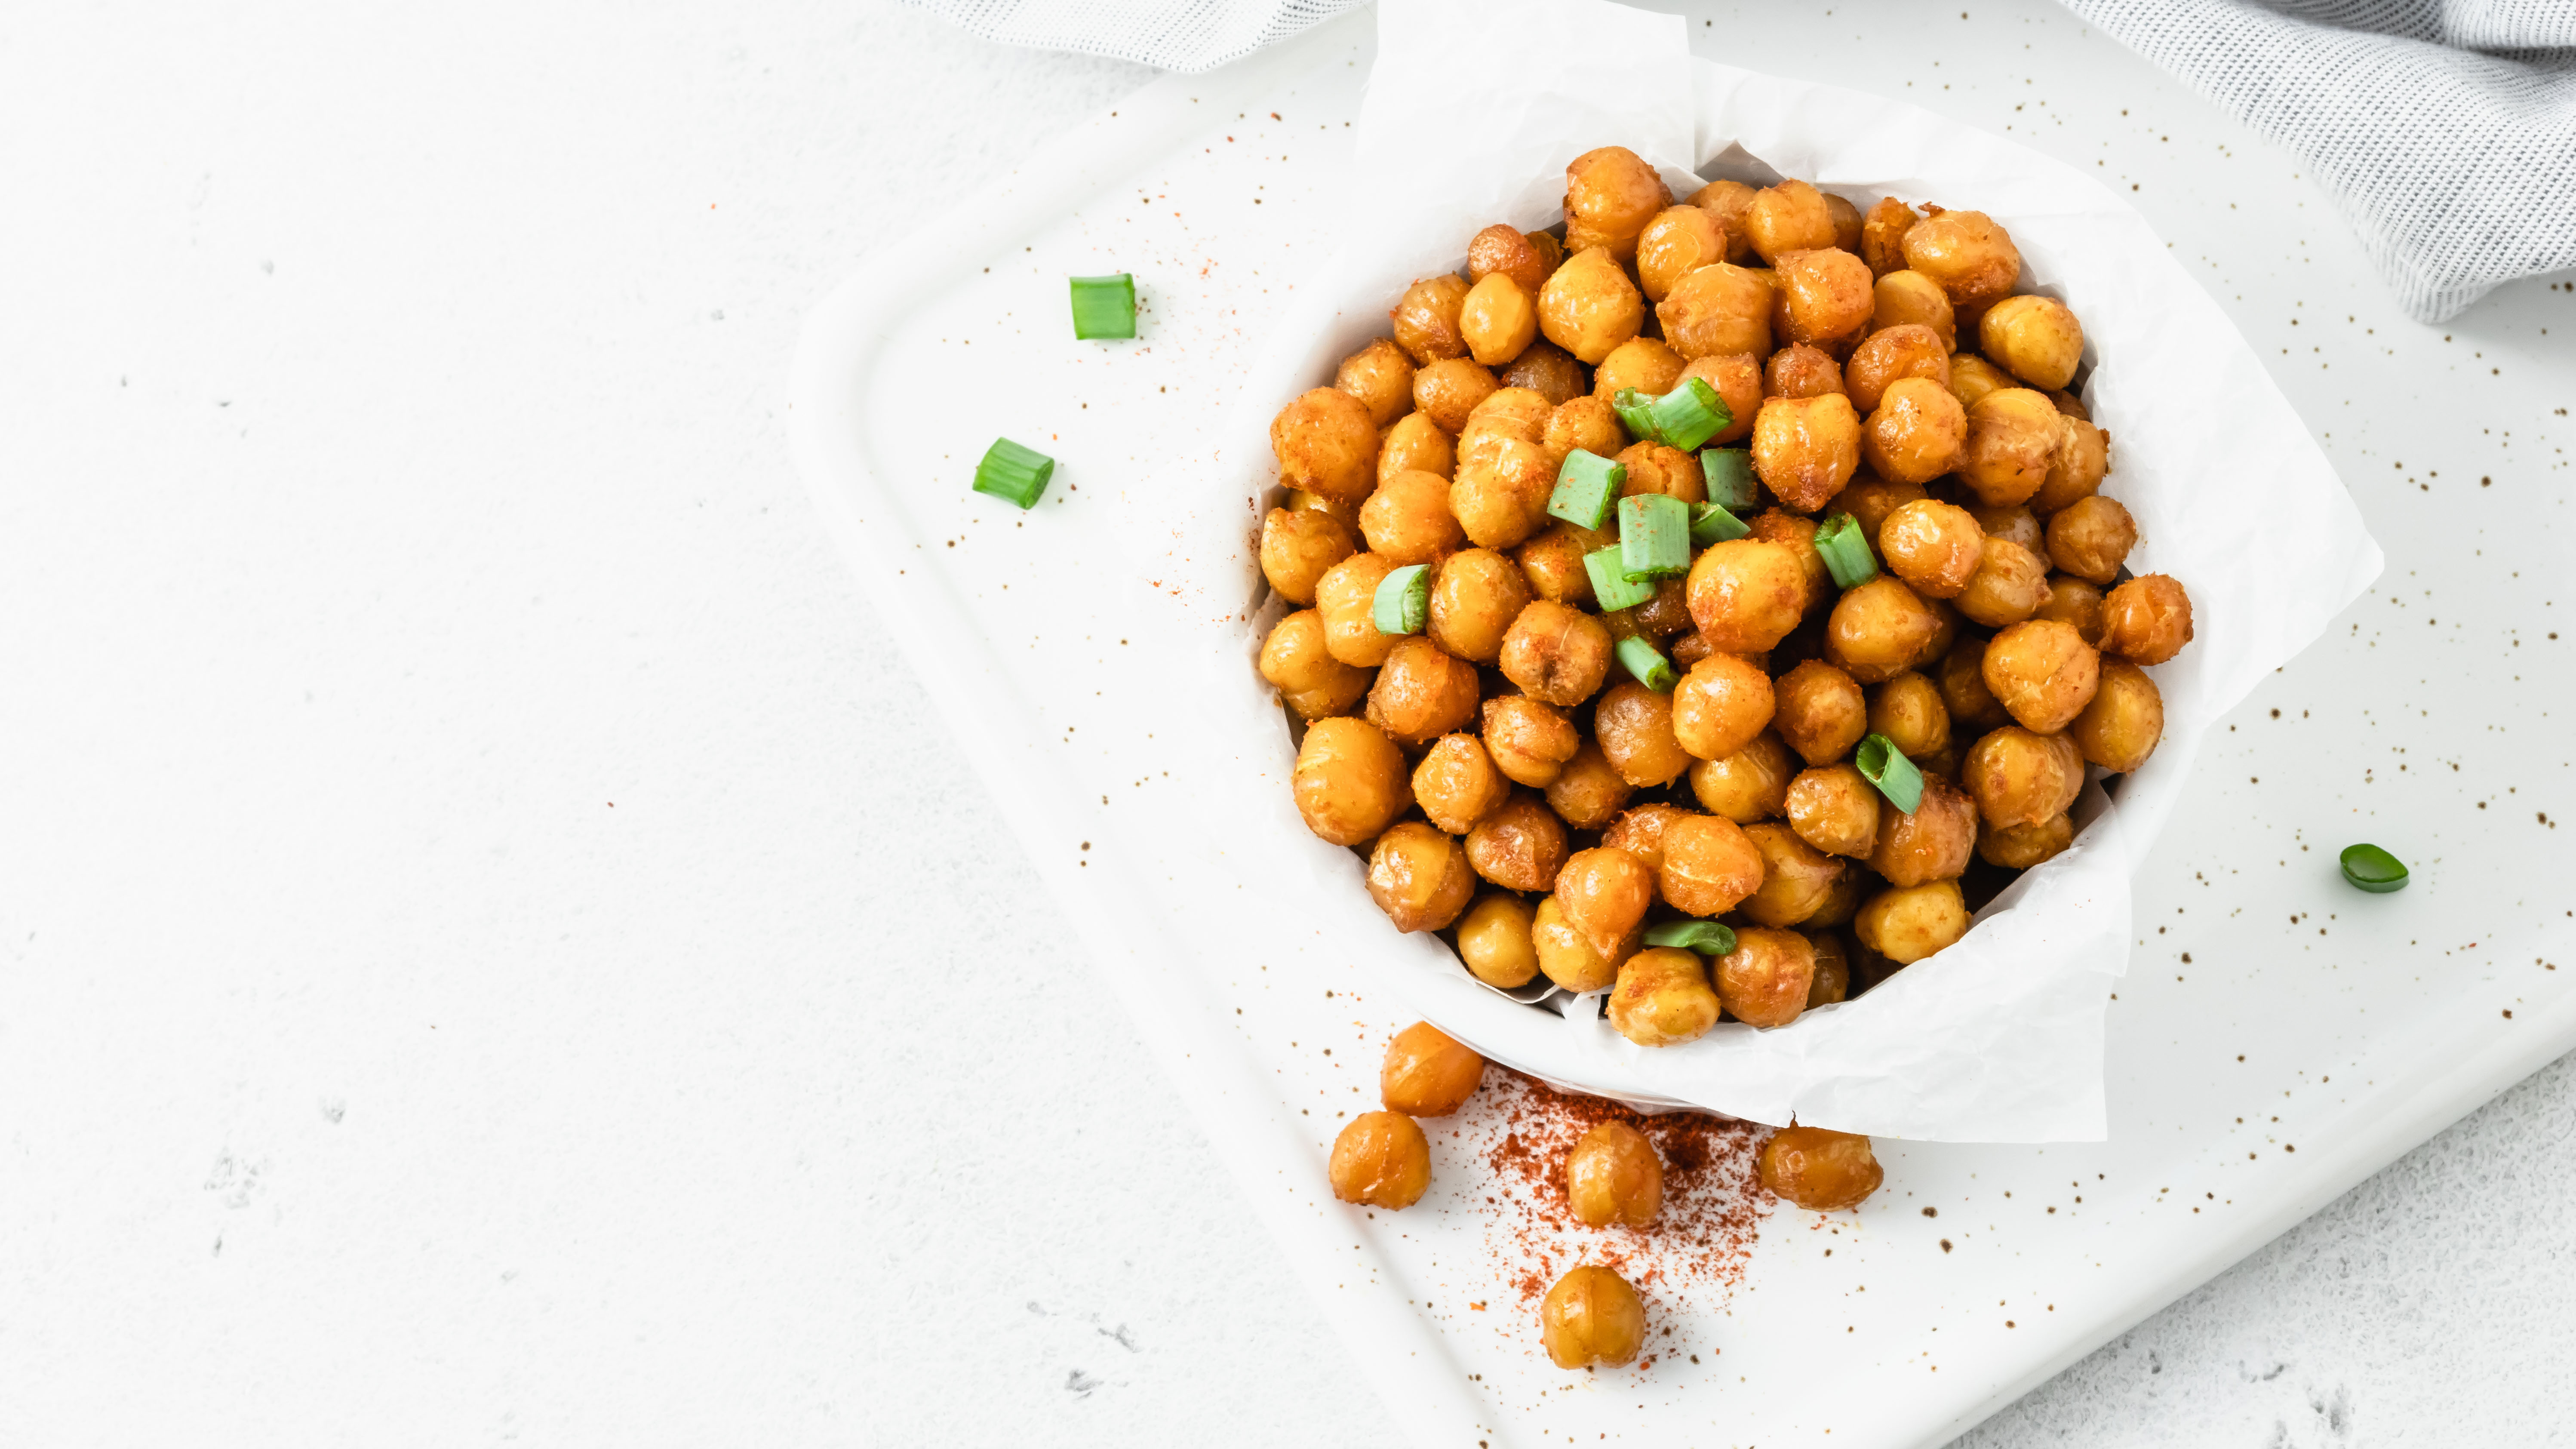 Looking down on a bowl of chickpeas on a white table